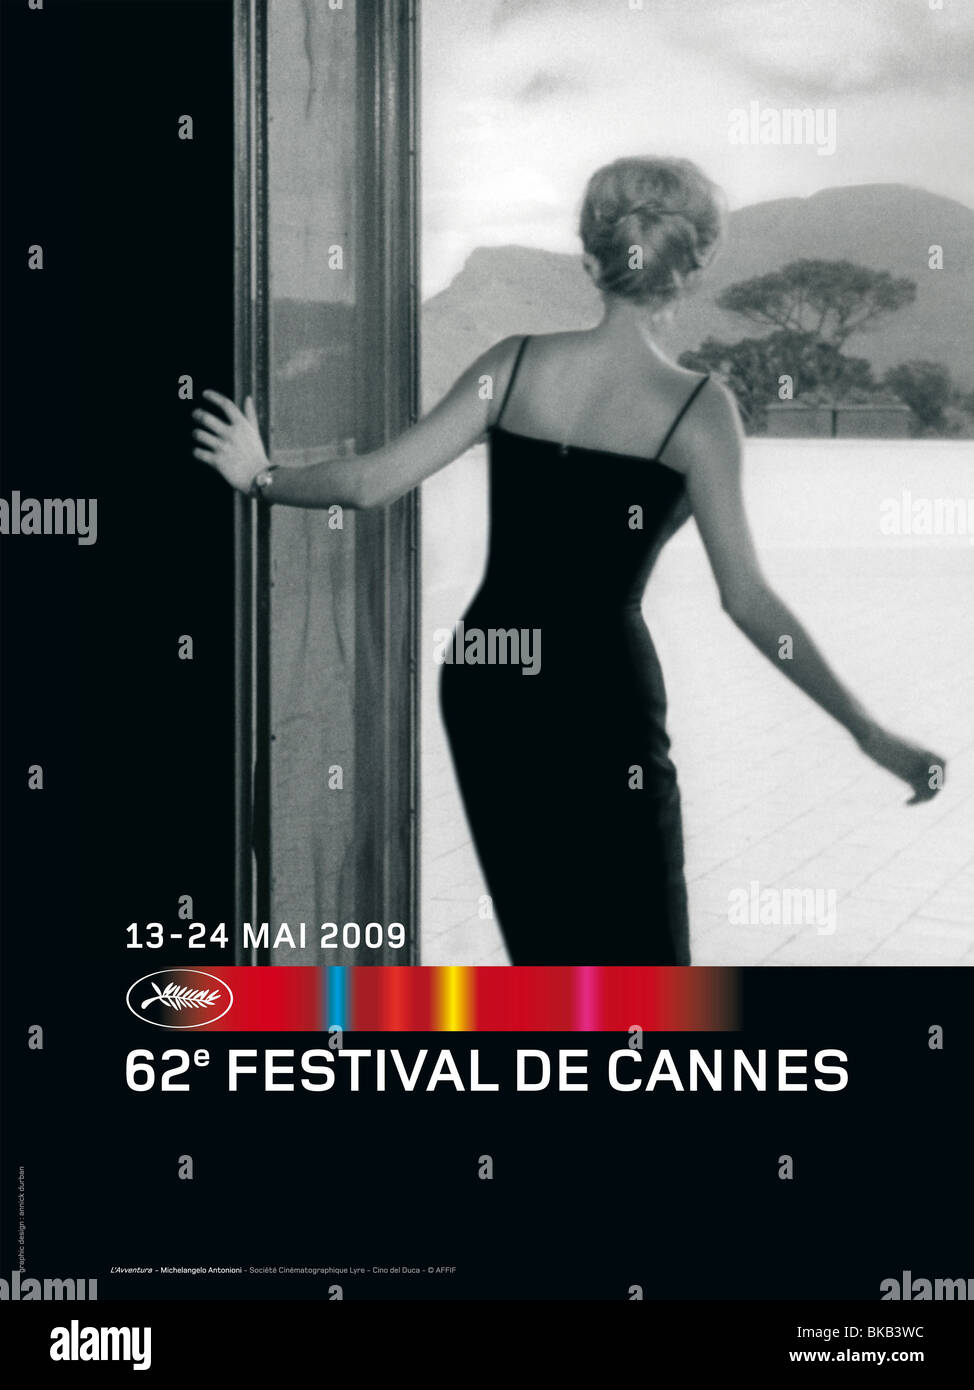 Poster Cannes film festival 2009 Stock Photo